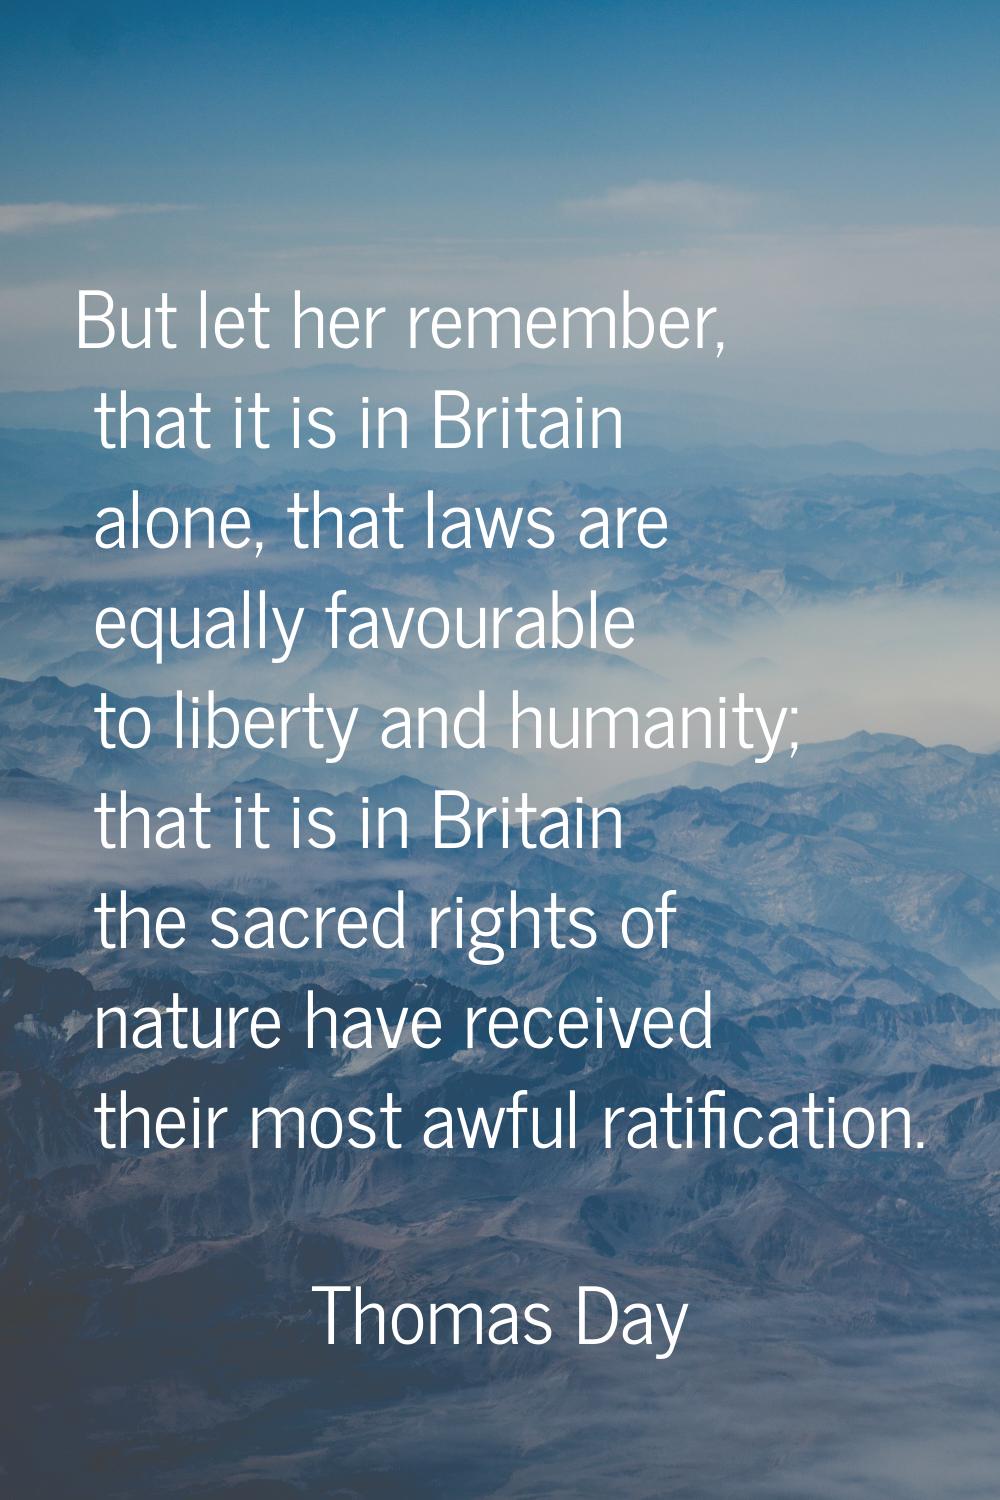 But let her remember, that it is in Britain alone, that laws are equally favourable to liberty and 